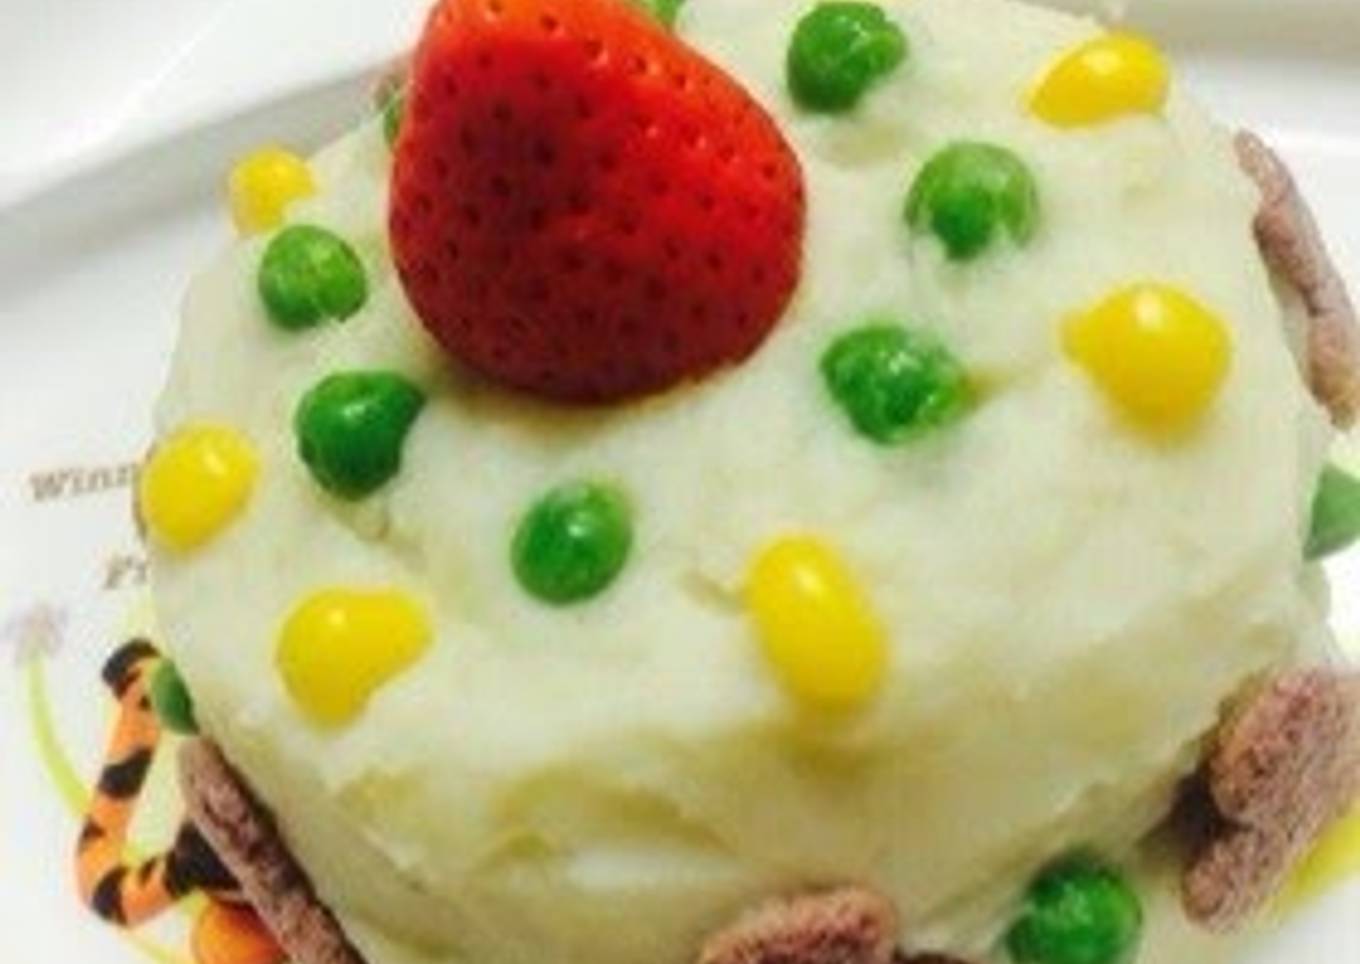 Egg and Dairy Free Vegetable "Birthday Cake" For Babies